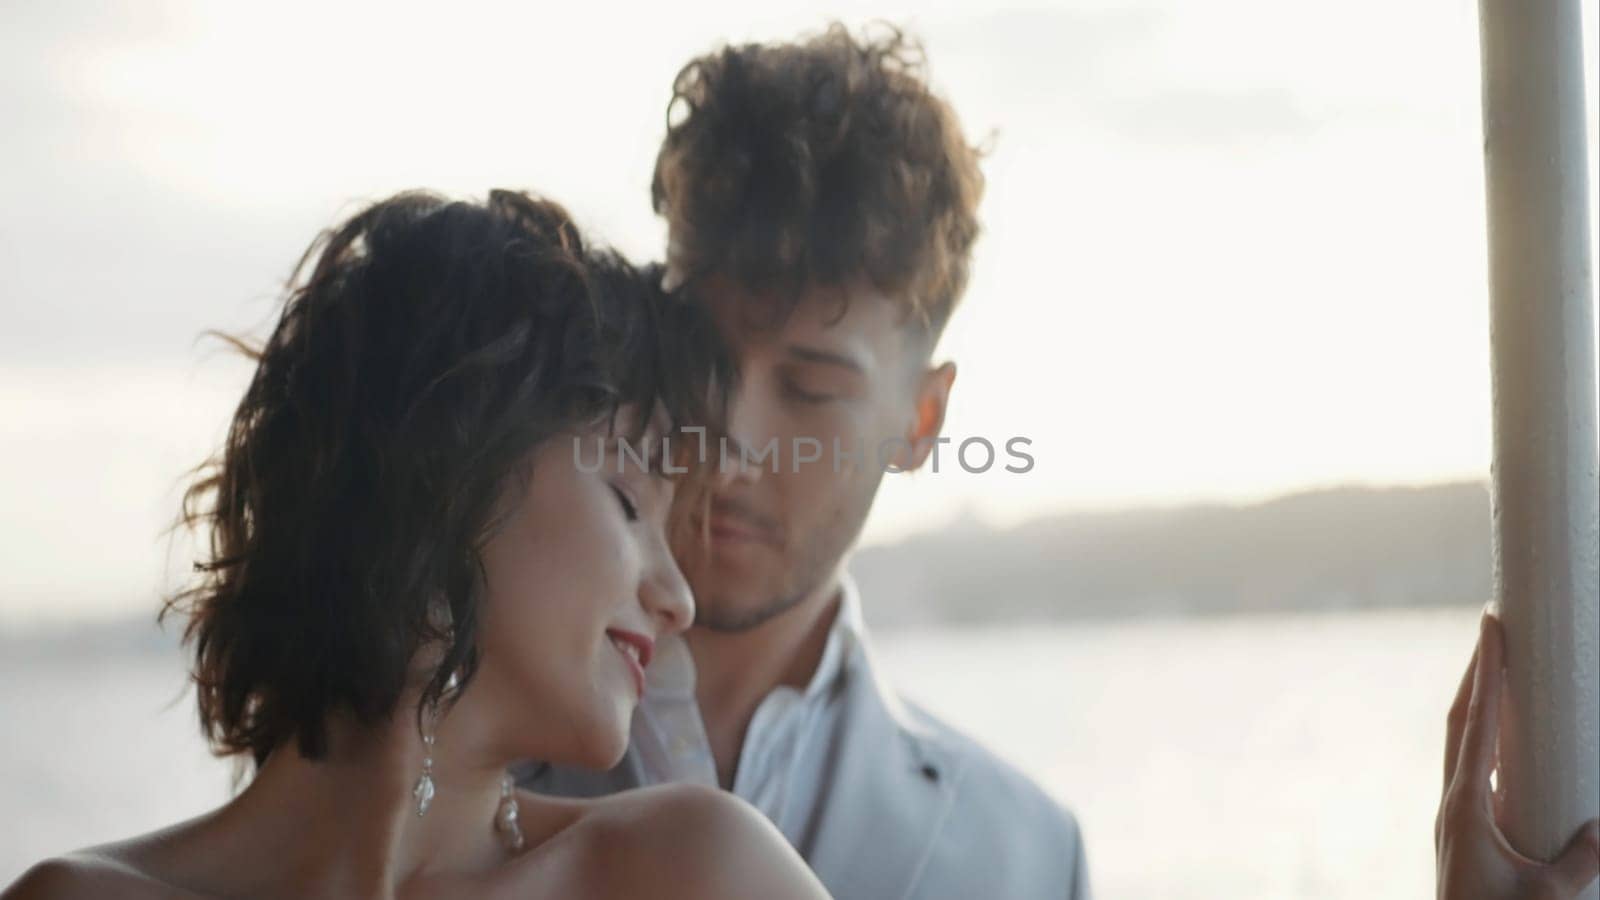 Handsome man and beautiful woman on a date near the river embracing and laughing. Action. Female with curly short hair and a loving guy behind her outdoors